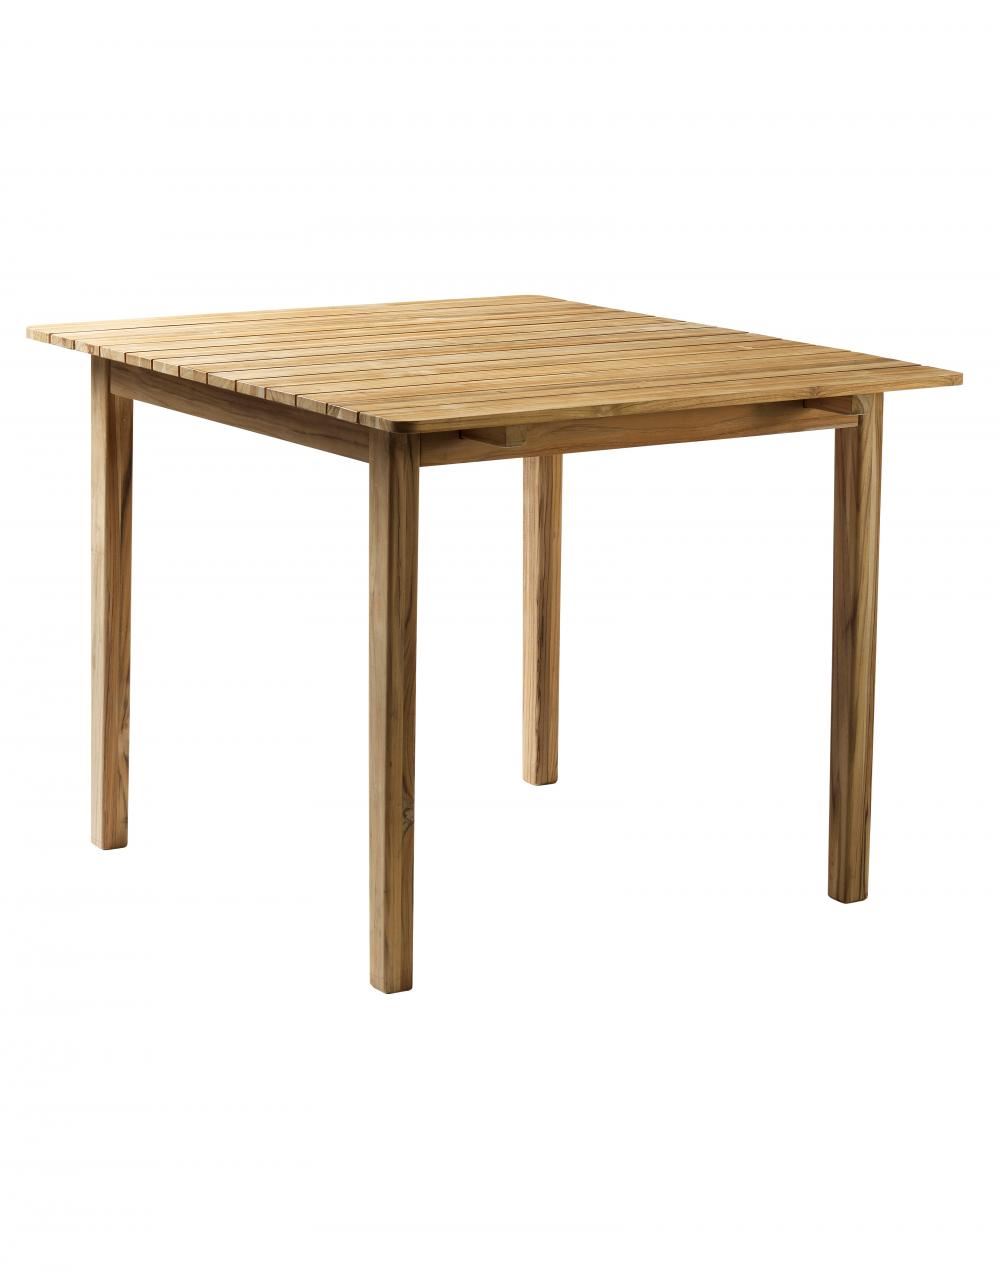 Fdb Mobler M3 Square Garden Table None Light Wood Designer Furniture From Holloways Of Ludlow